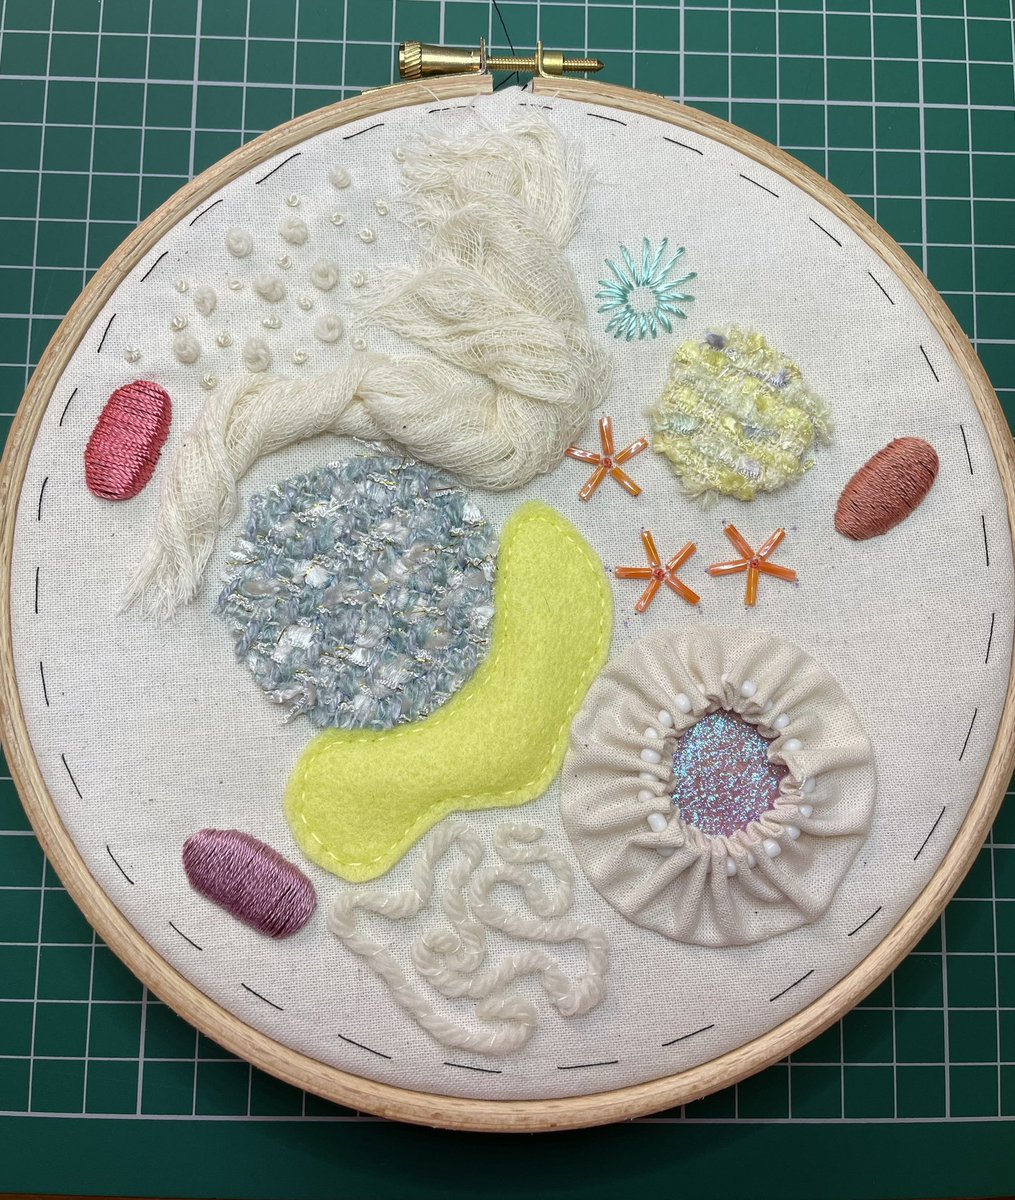 Still sampling and experimenting. Thinking about marine life; #SeaCucumbers, #BrittleStars, #Sponges and the like. 

#WorkInProgress #HandEmbroidery #IAmSewing